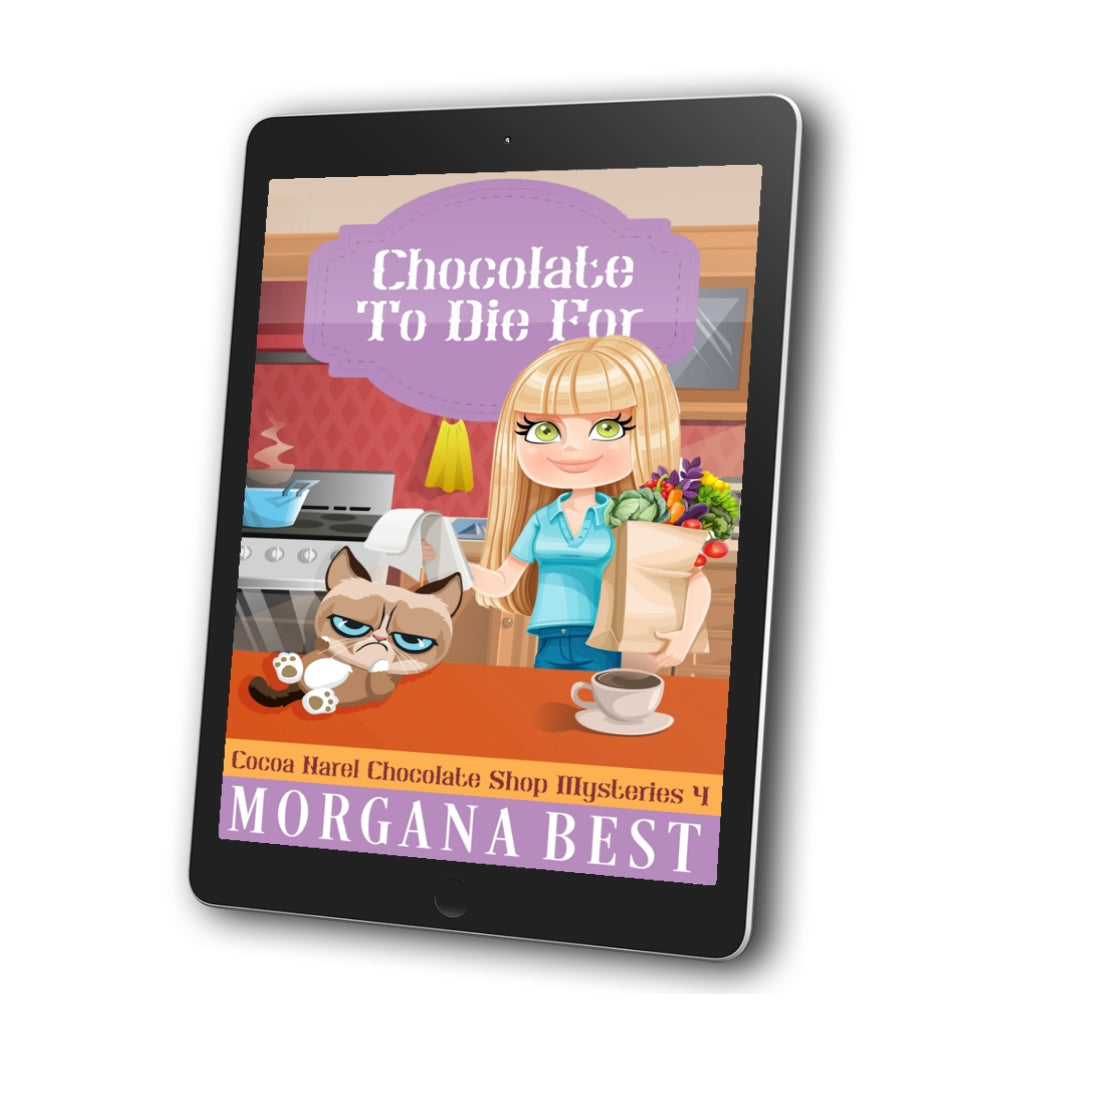 Chocolate To Die For ebook cozy mystery morgana best